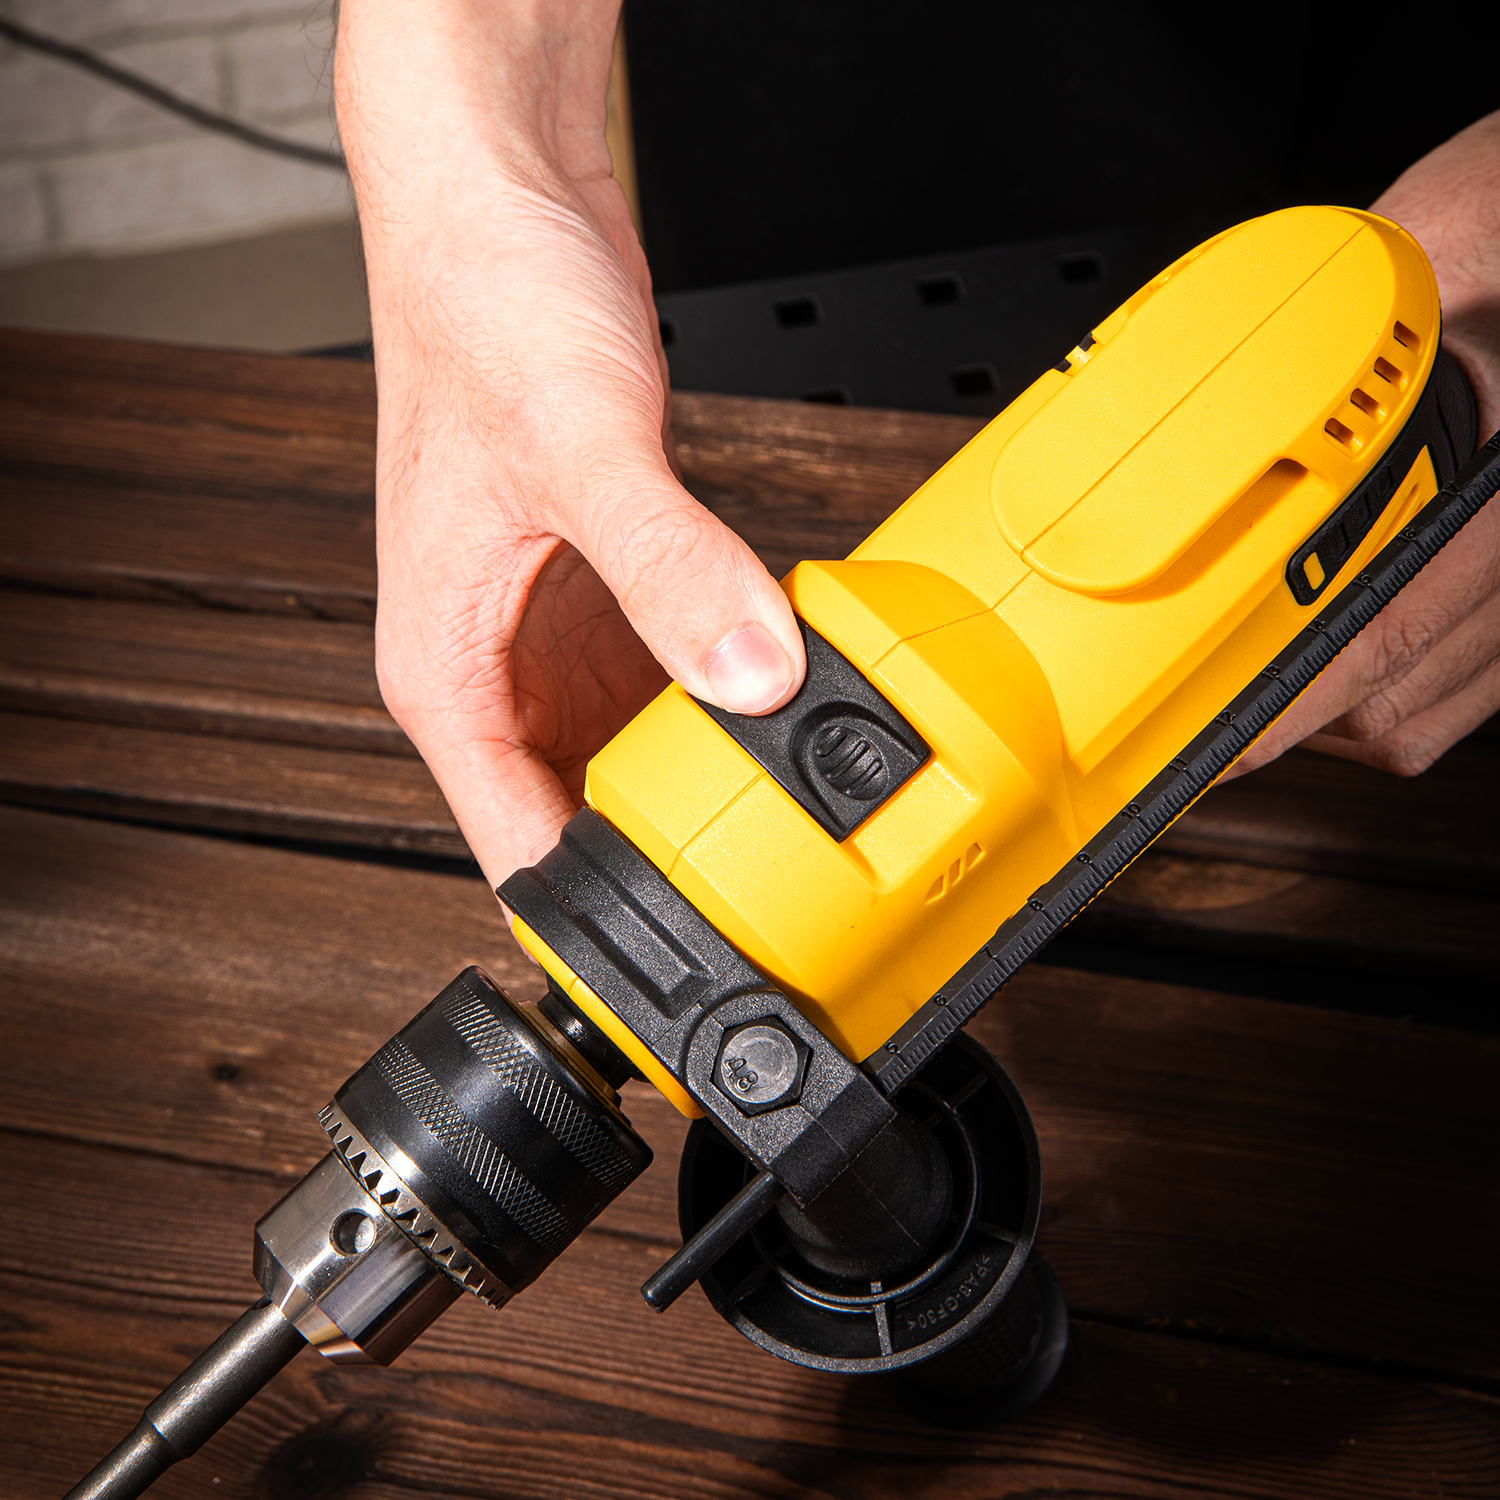 Portable Corded electric drill for tires